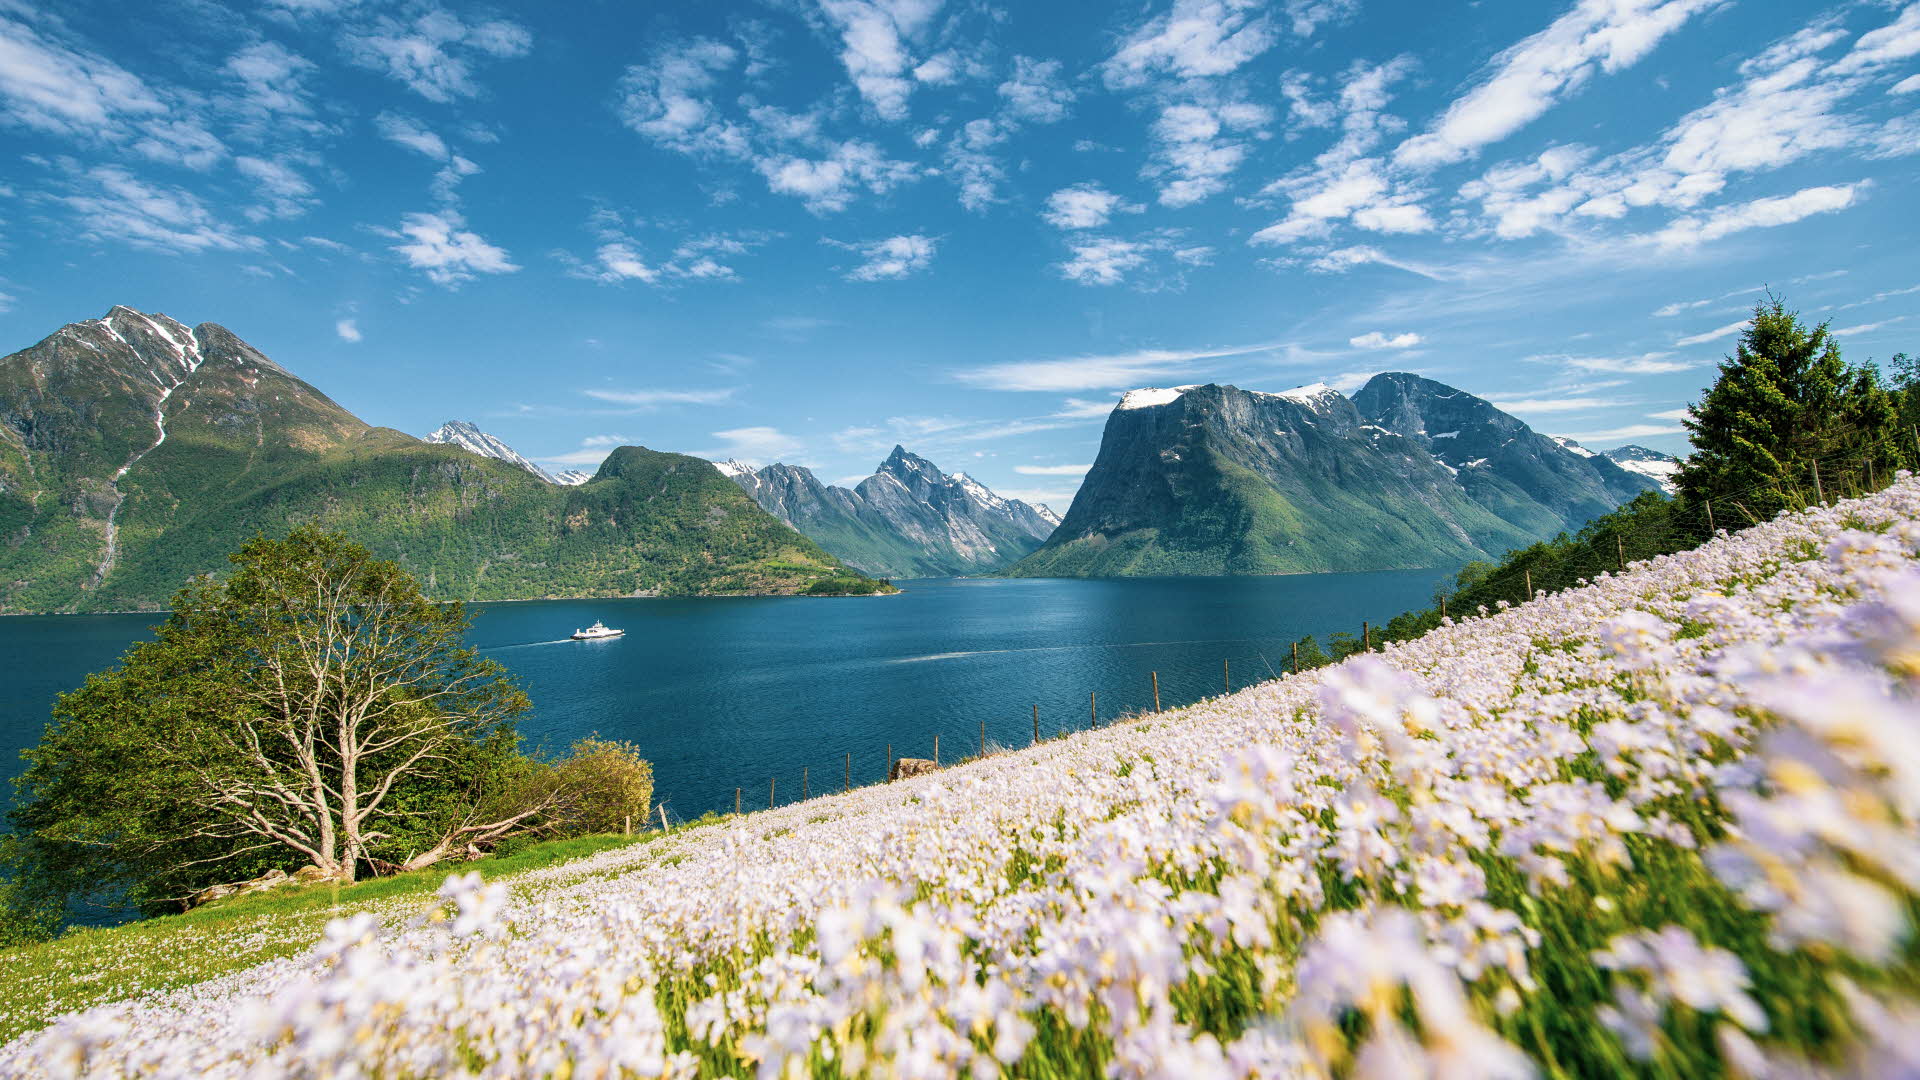 A field of purple flowers with views towards the Hjørundfjord and Sunnmøre alps.